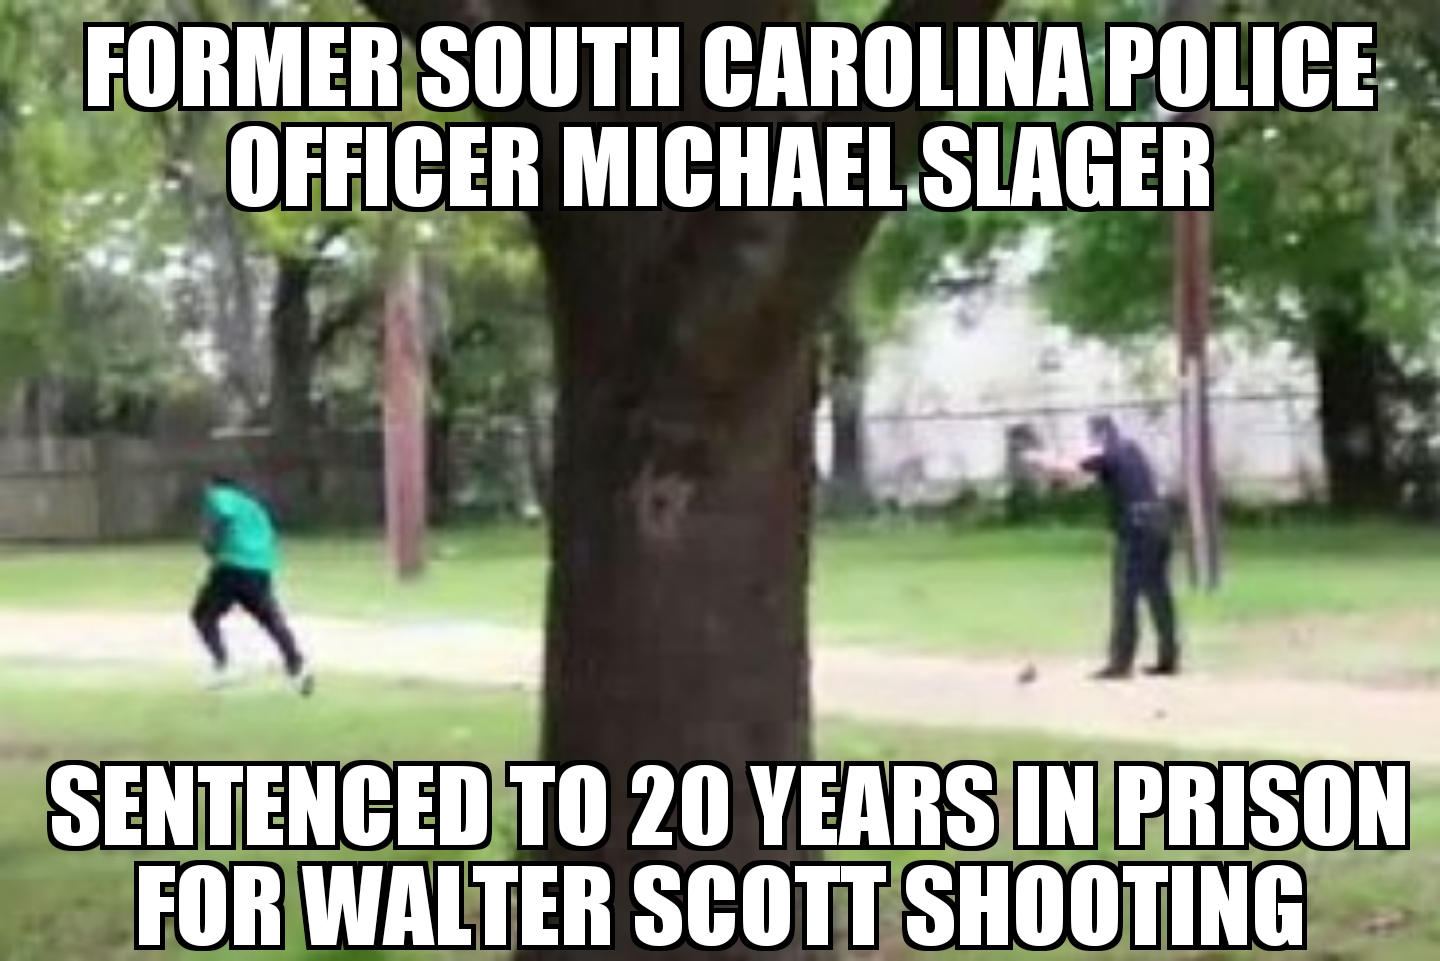 Michael Slager gets 20 years for Walter Scott shooting